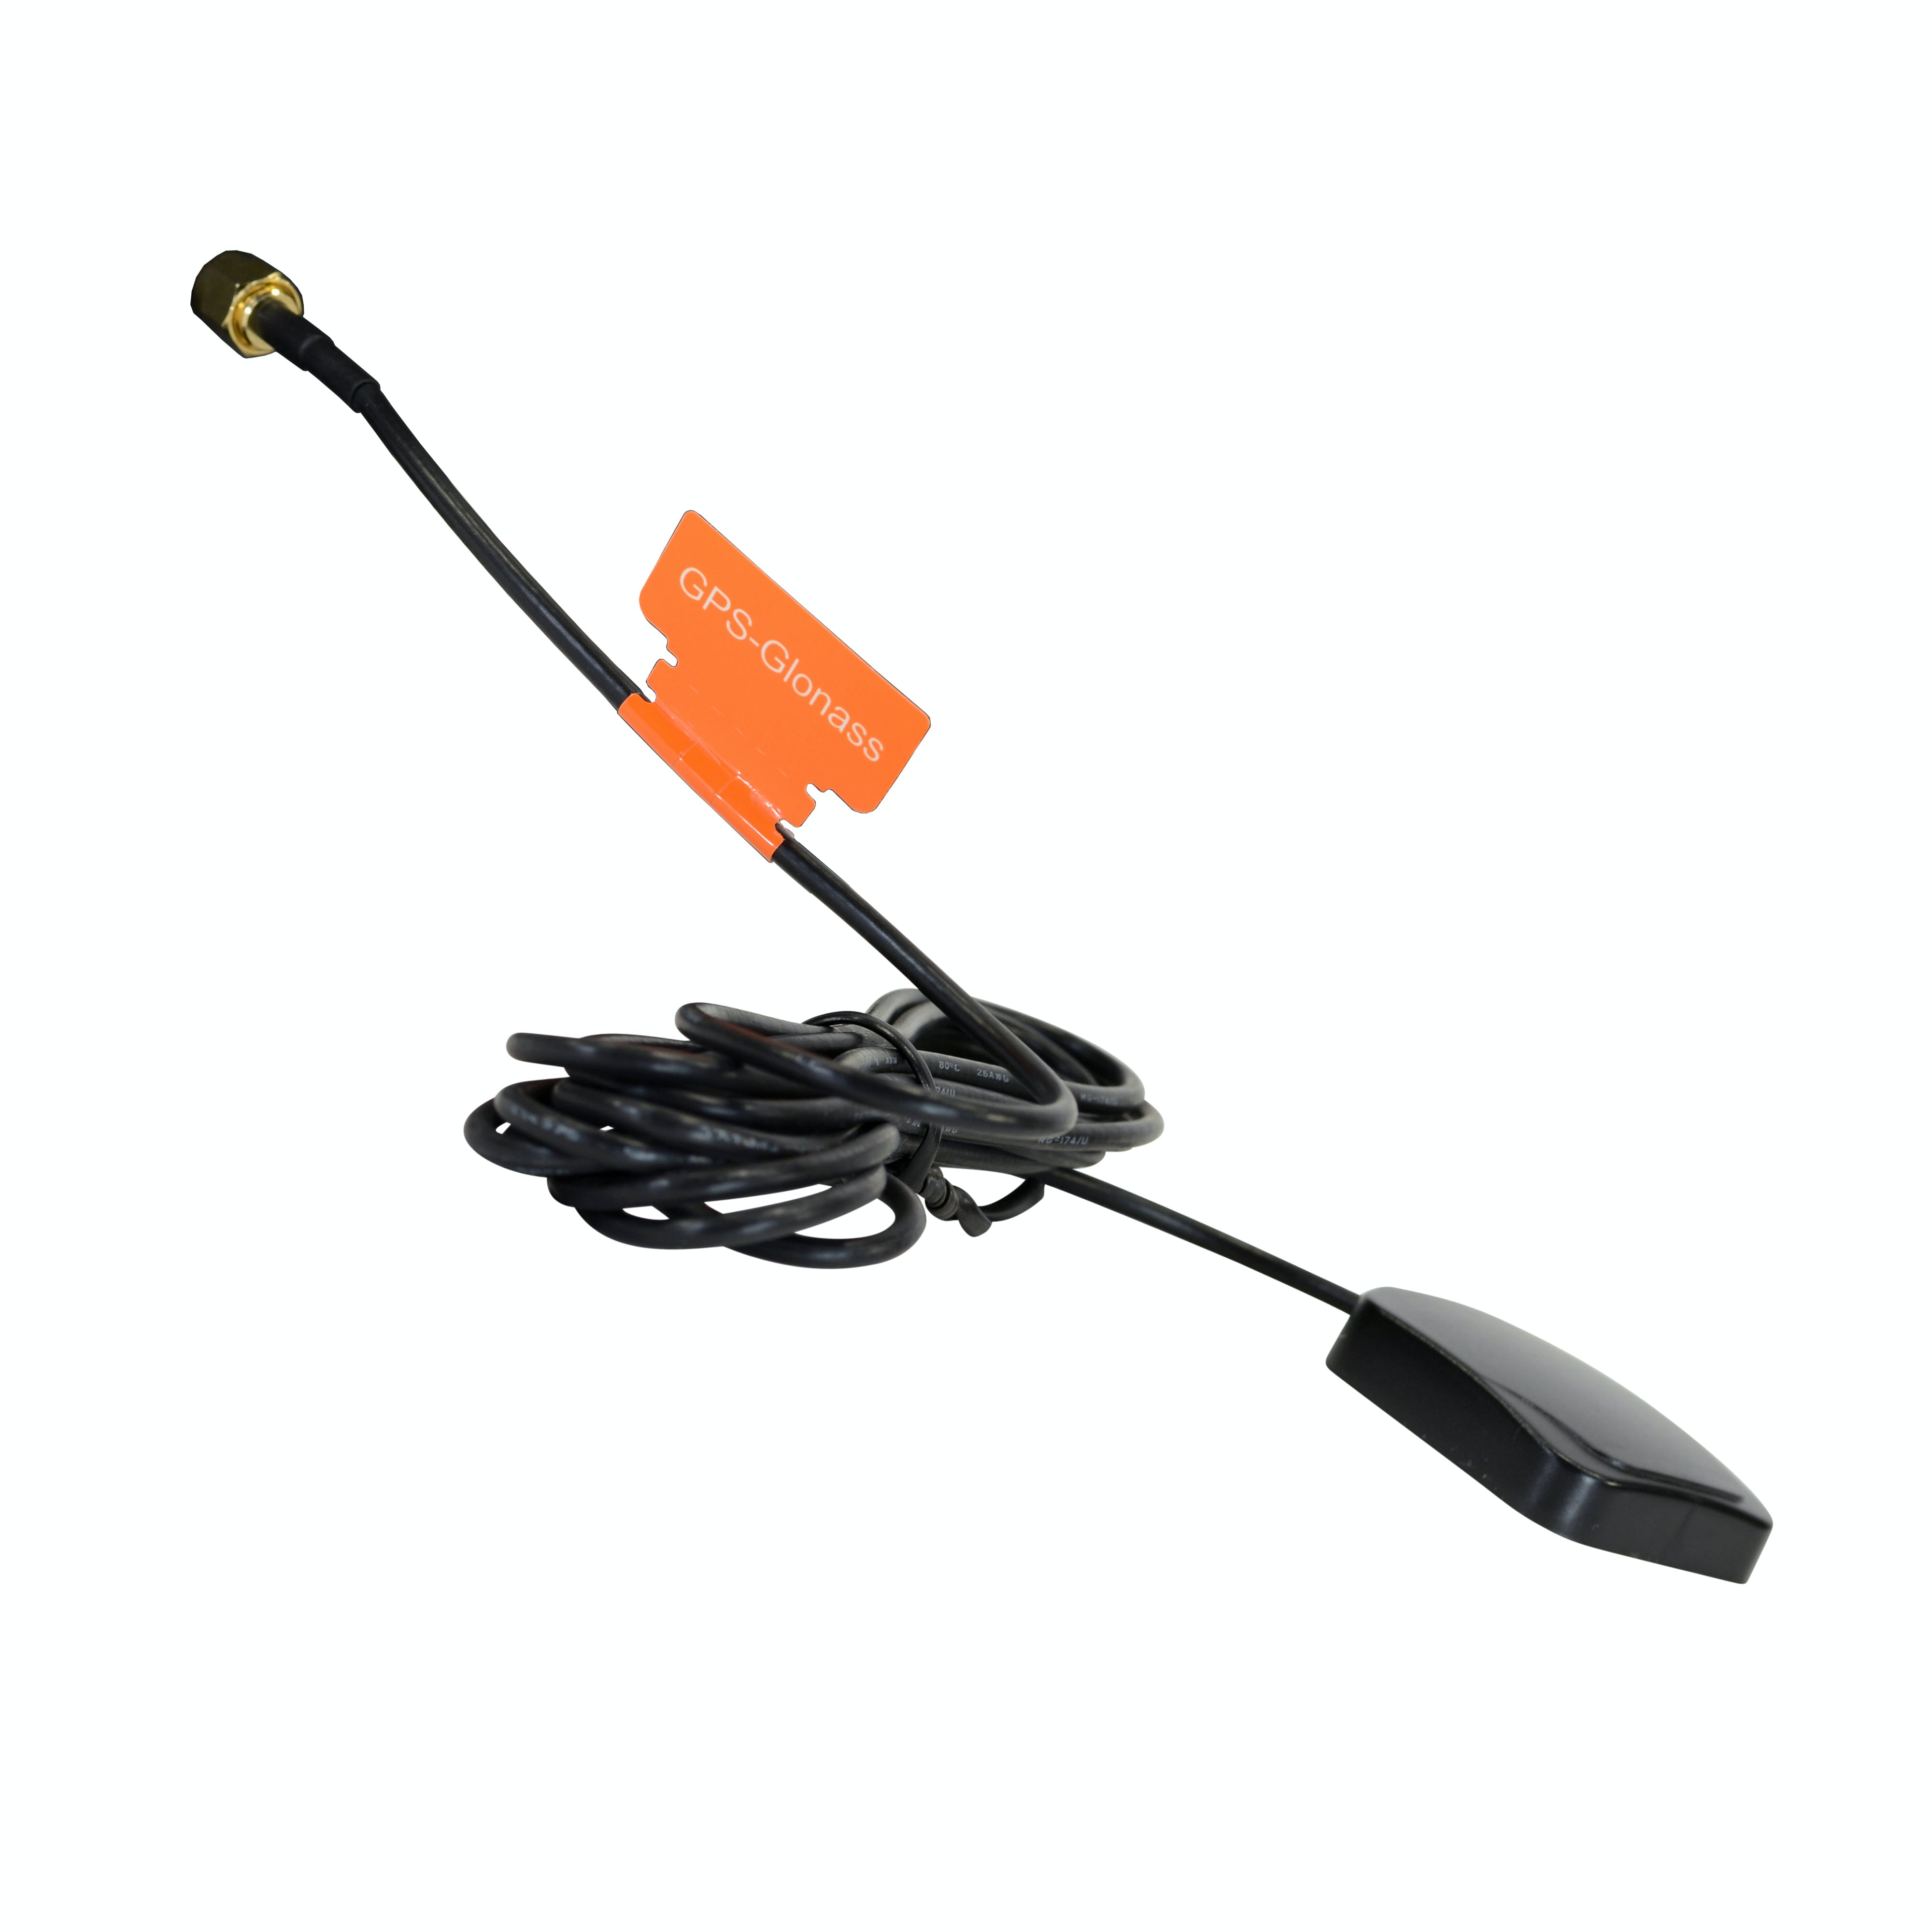 AEM 30-2208 10Hz Replacement GPS Antenna for use with AEM GPS-enabled Devices